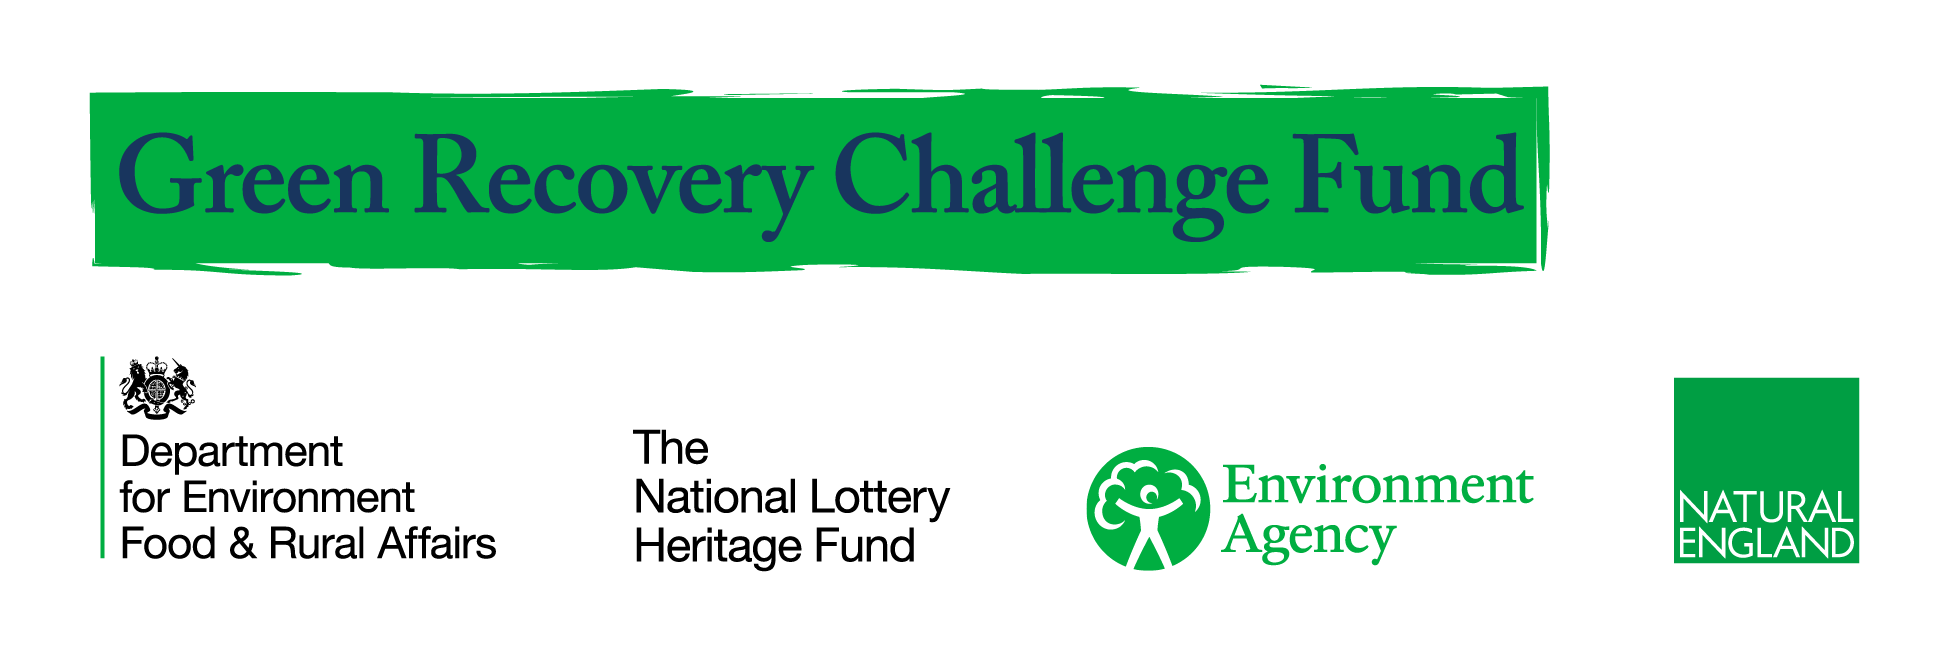 Green Recovery Challenge Fund logo